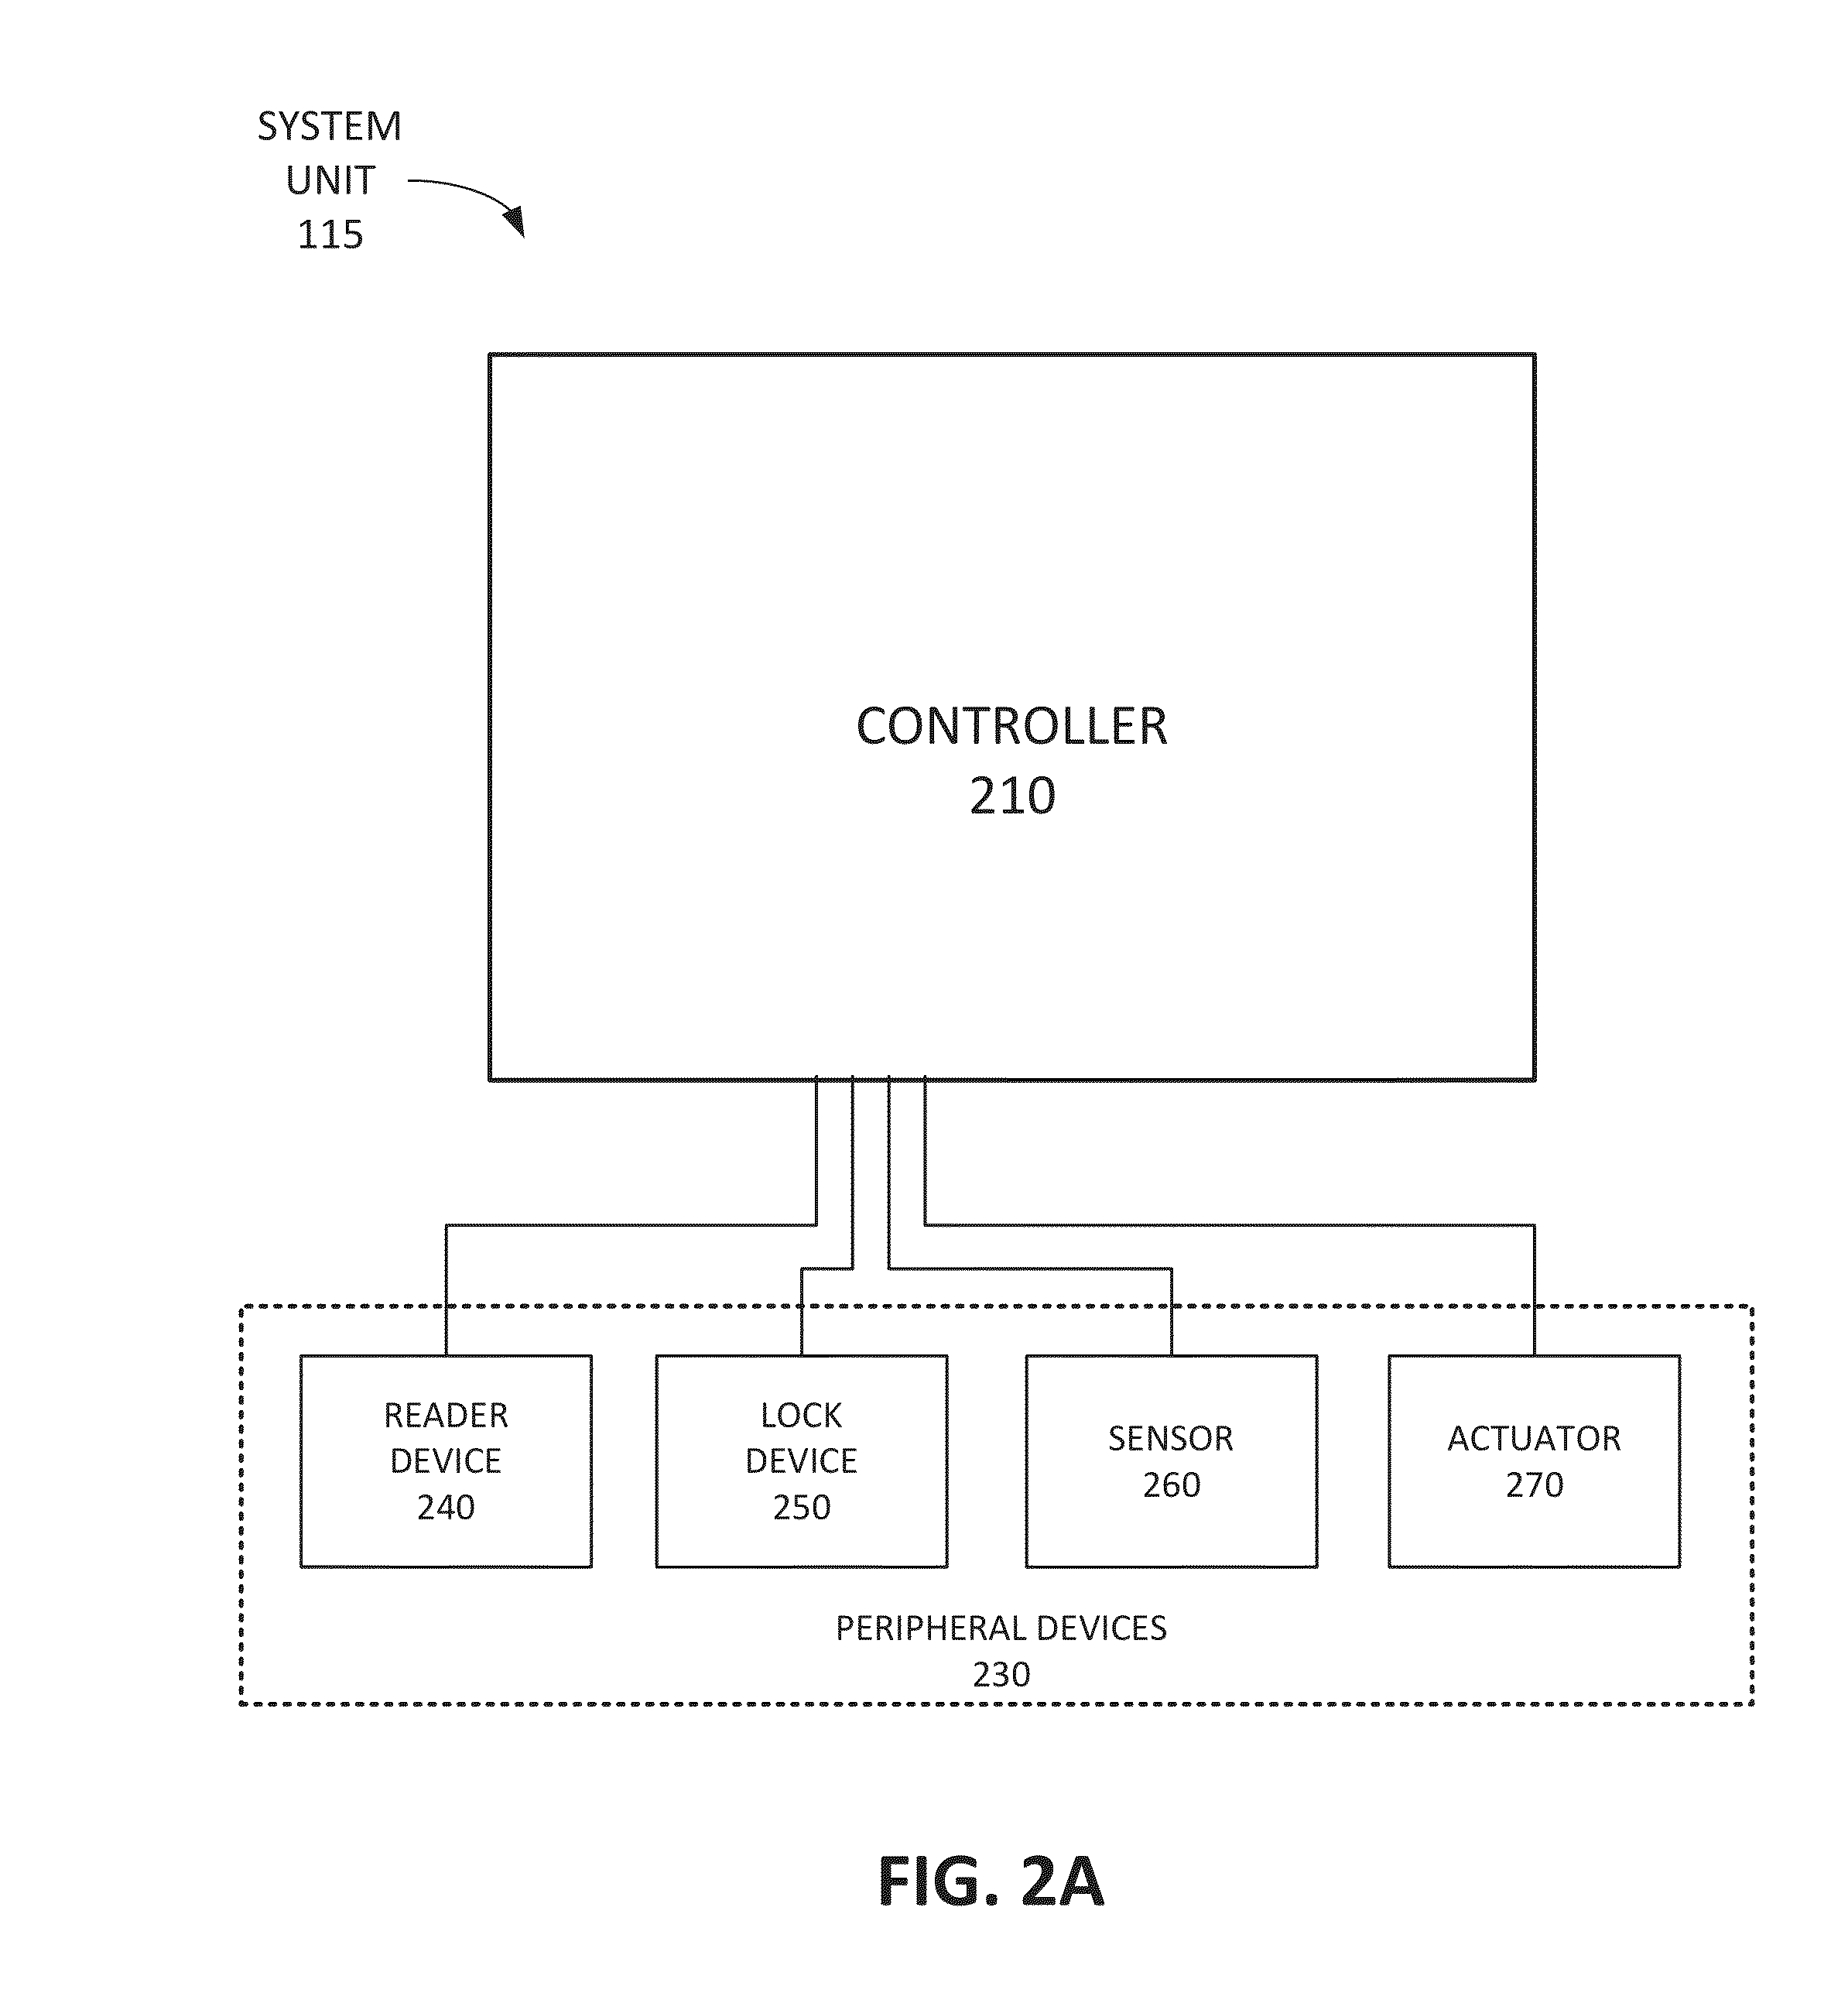 Control system configuration within an operational environment